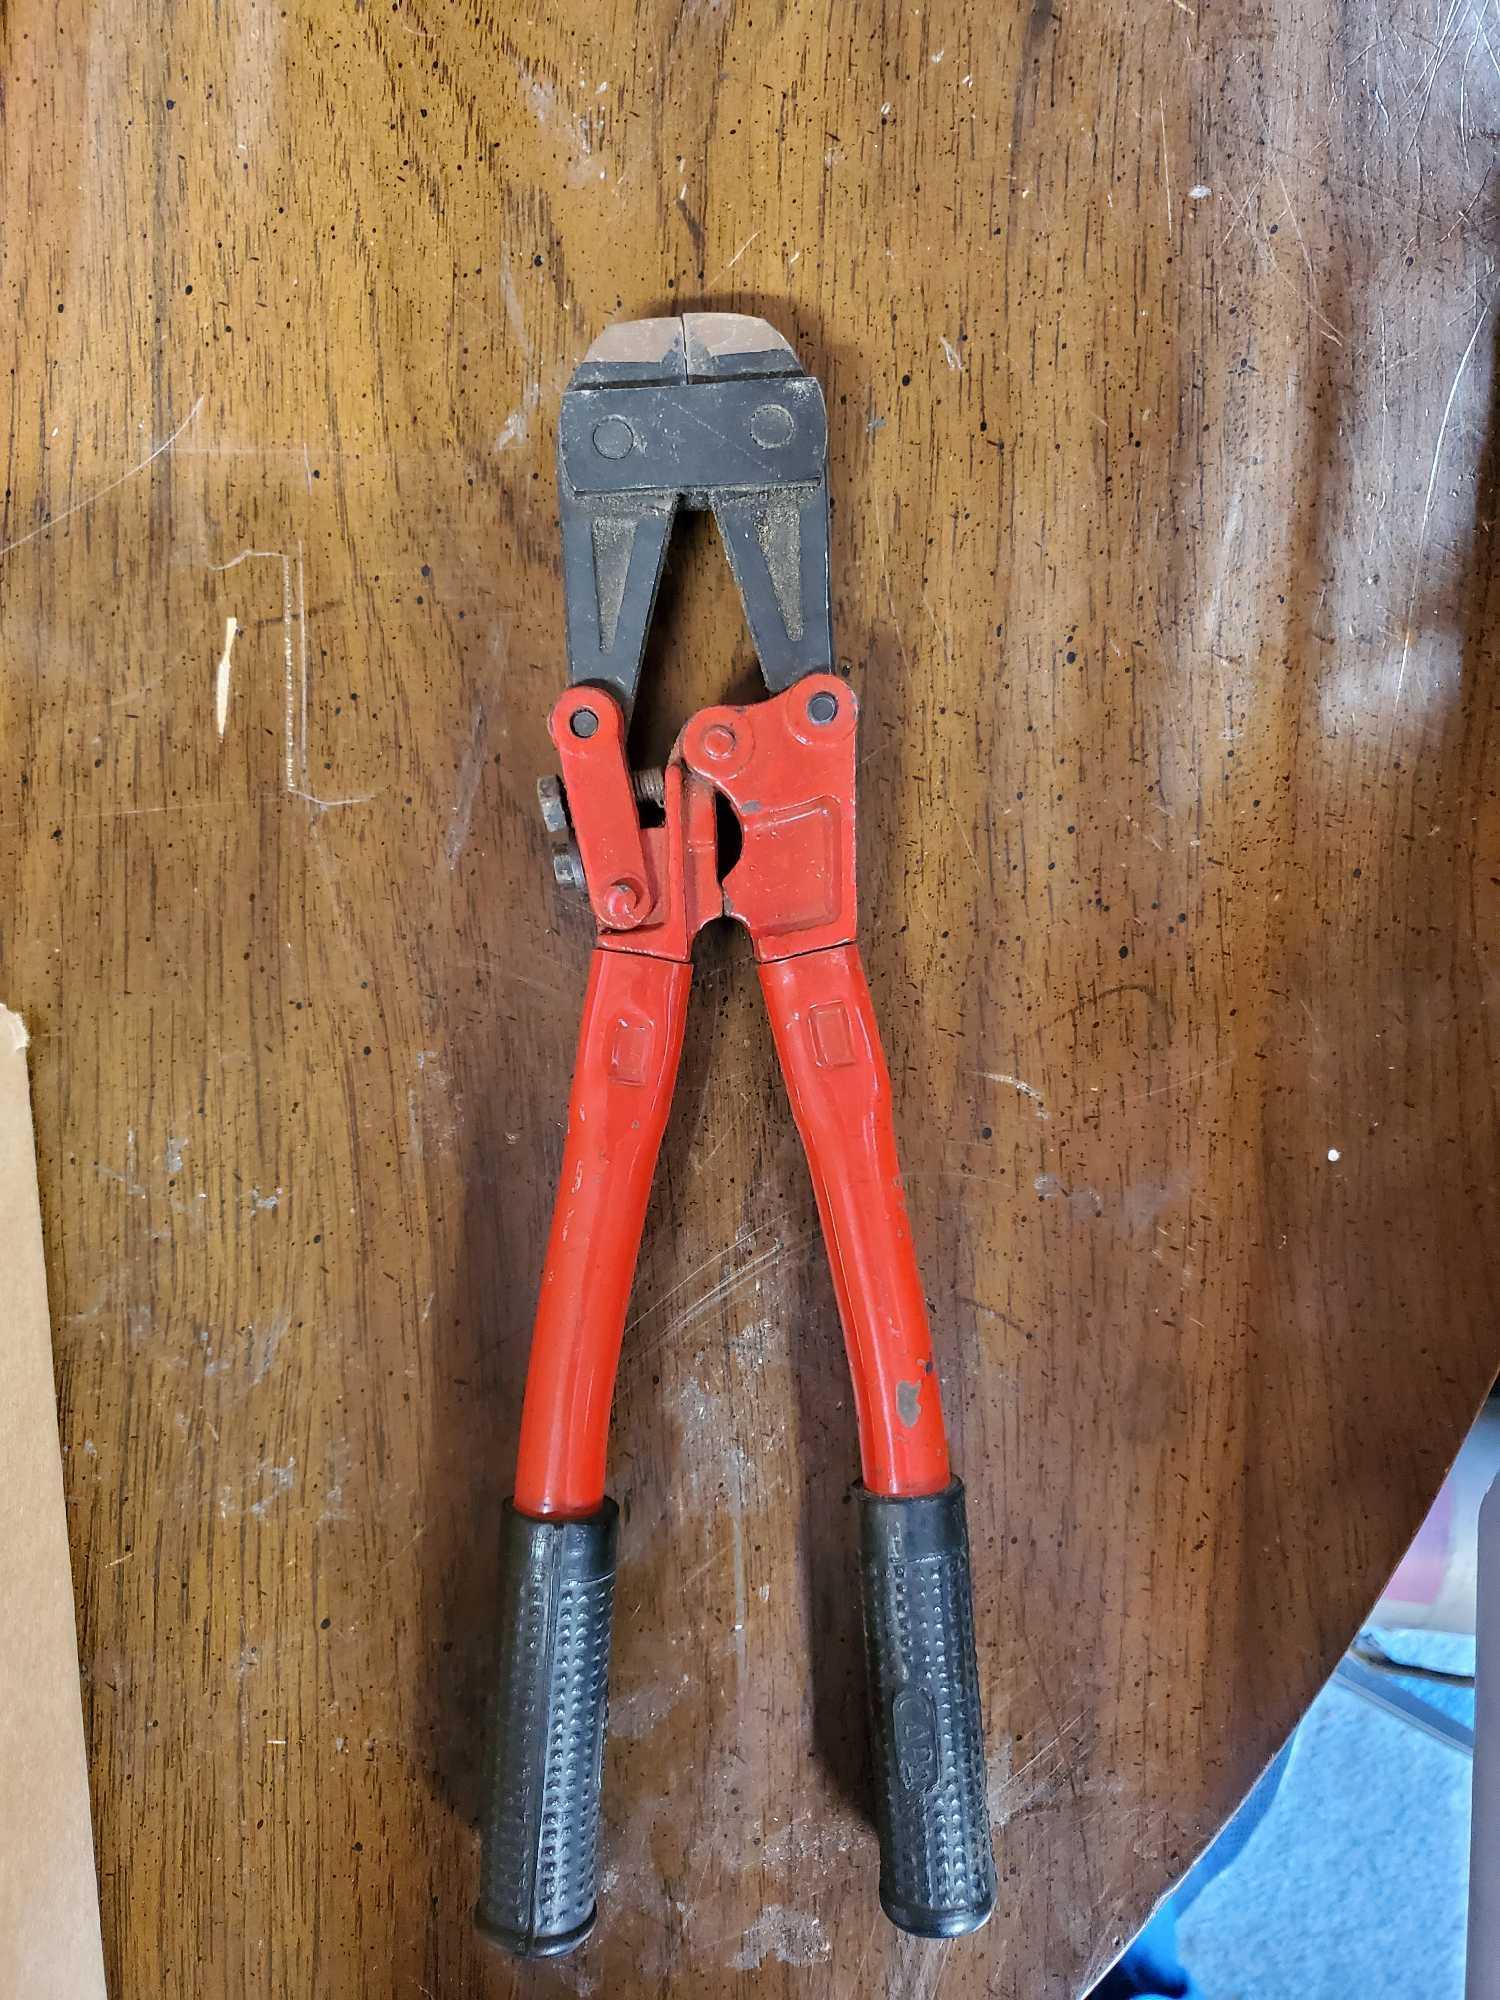 9 LOCKS-SMALL AND LARGE BOLT CUTTERS